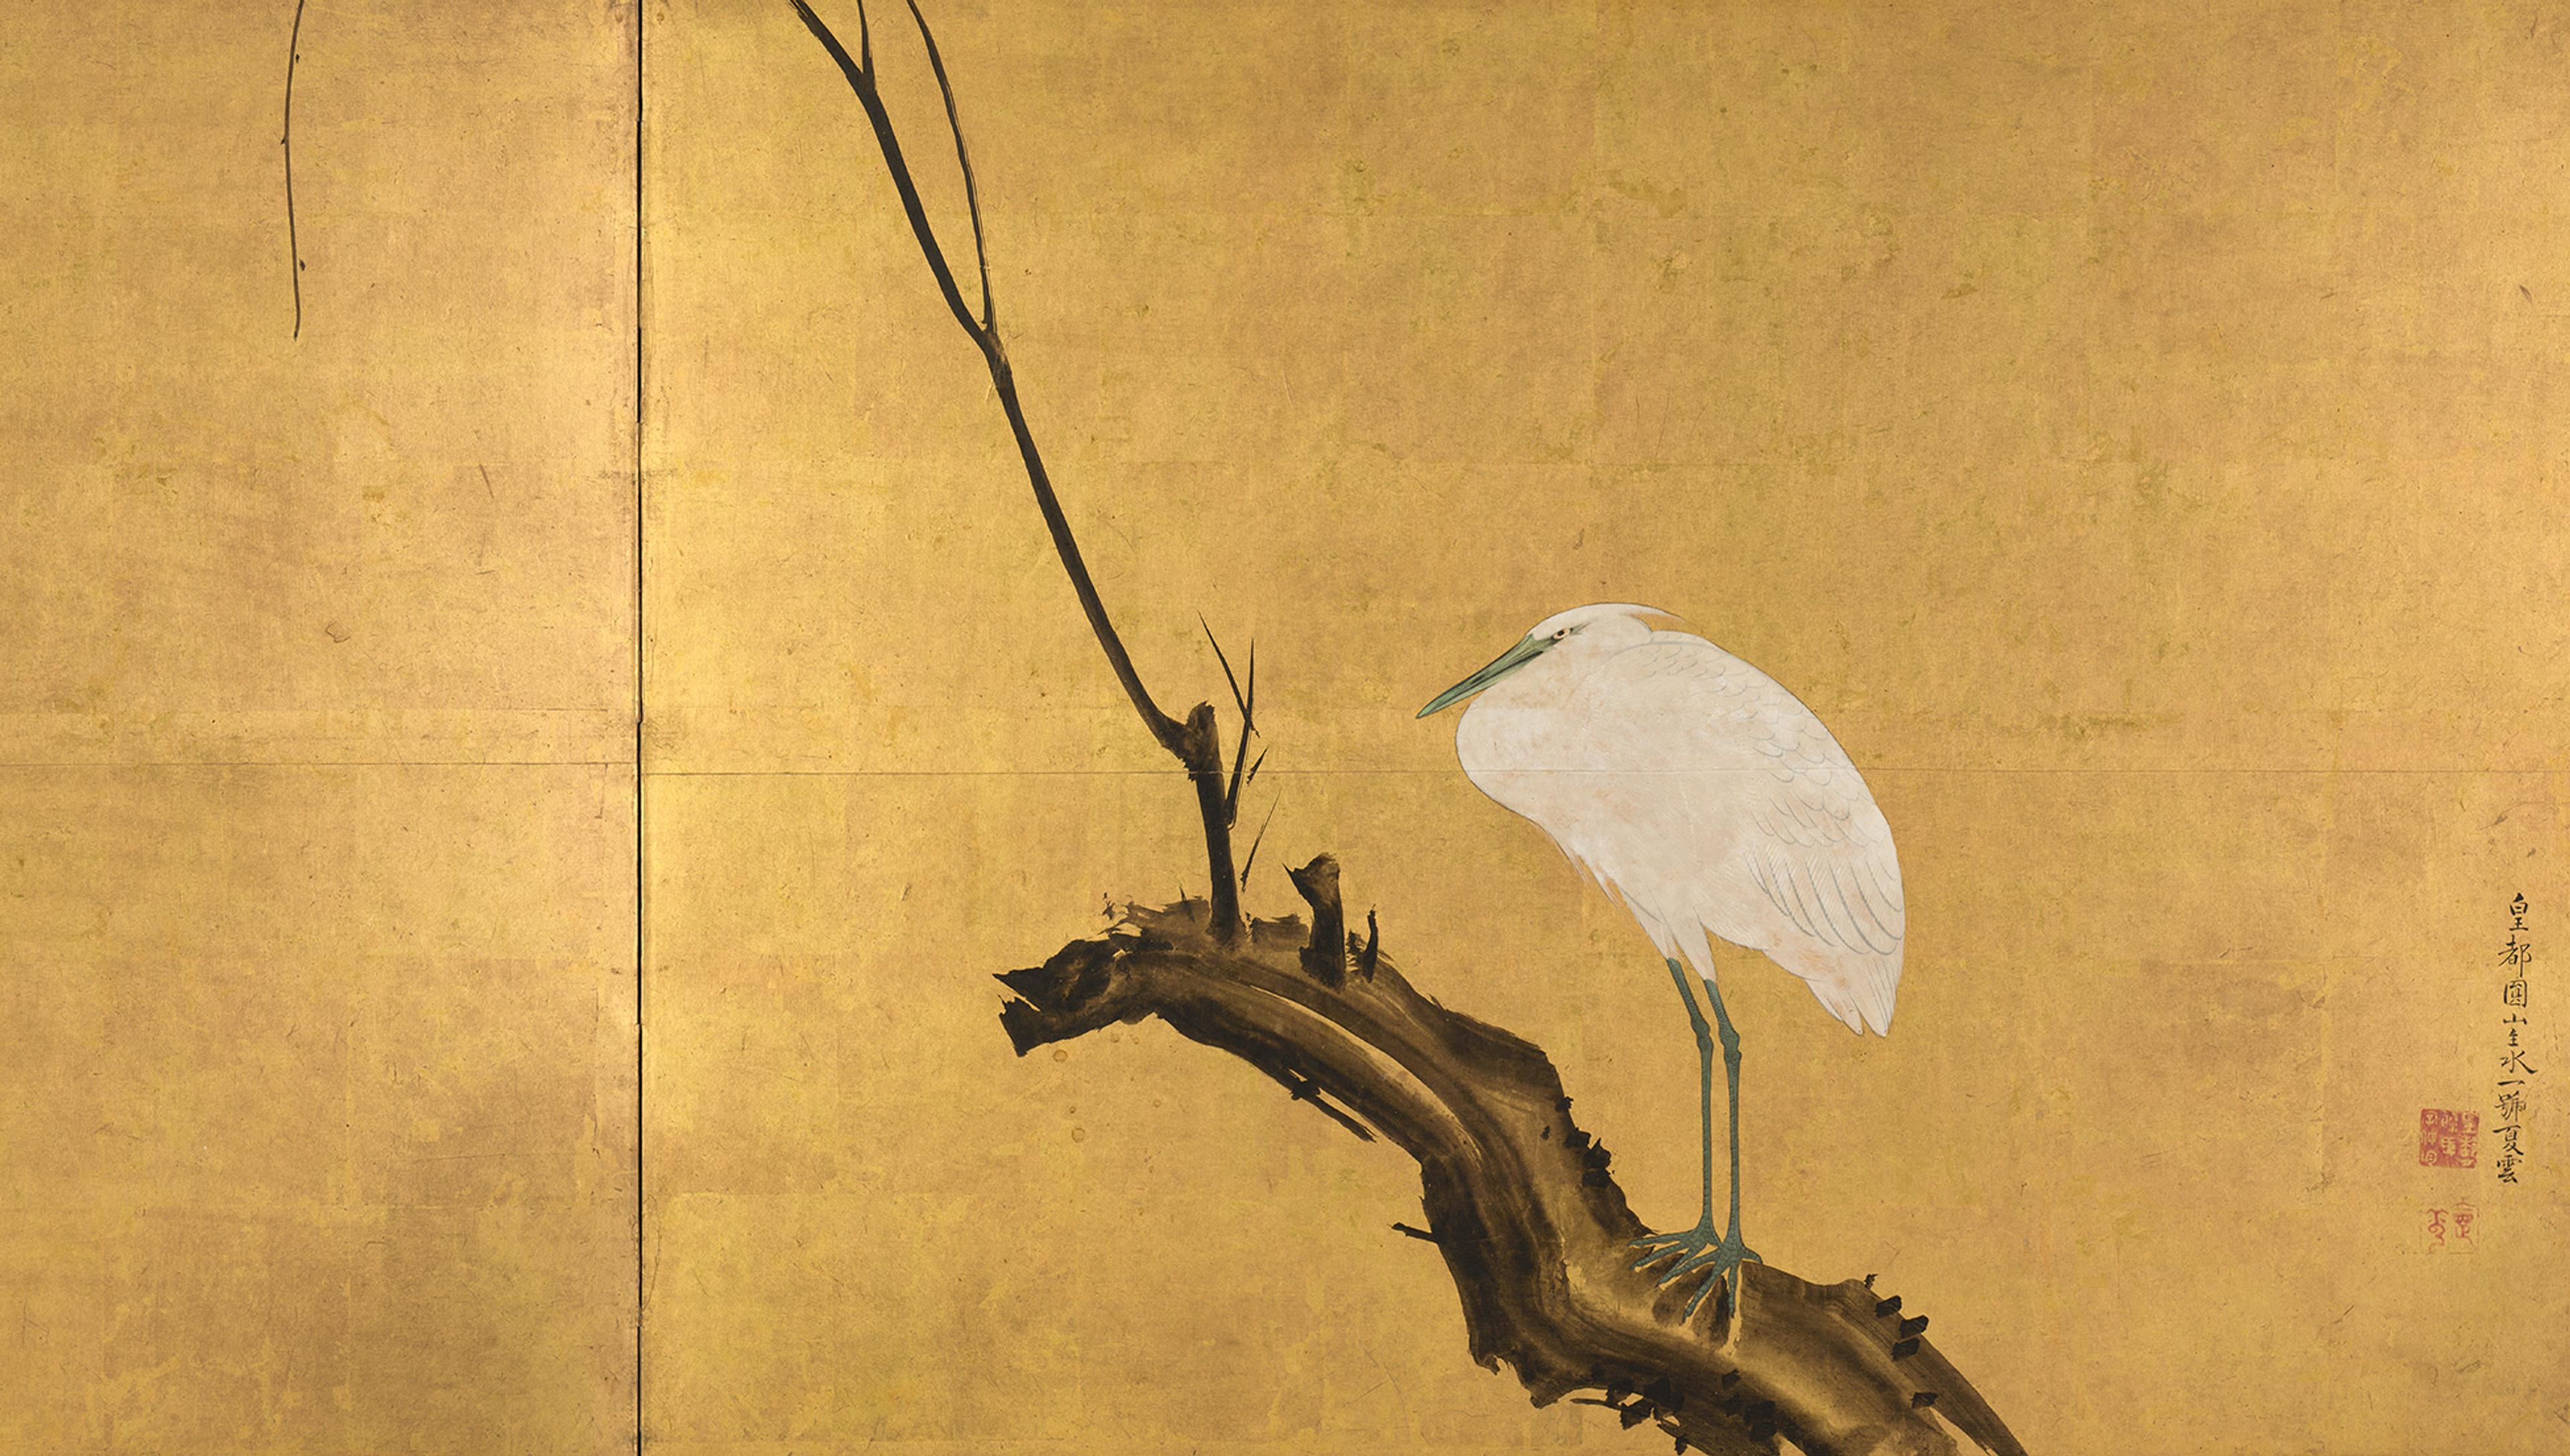 Painting of an egret perched on a branch against a gold background. The bird is depicted in fine detail with white feathers and a green beak, while the branch is rendered in dark, bold strokes. Traditional Asian calligraphy with red seals is present in the lower right corner.